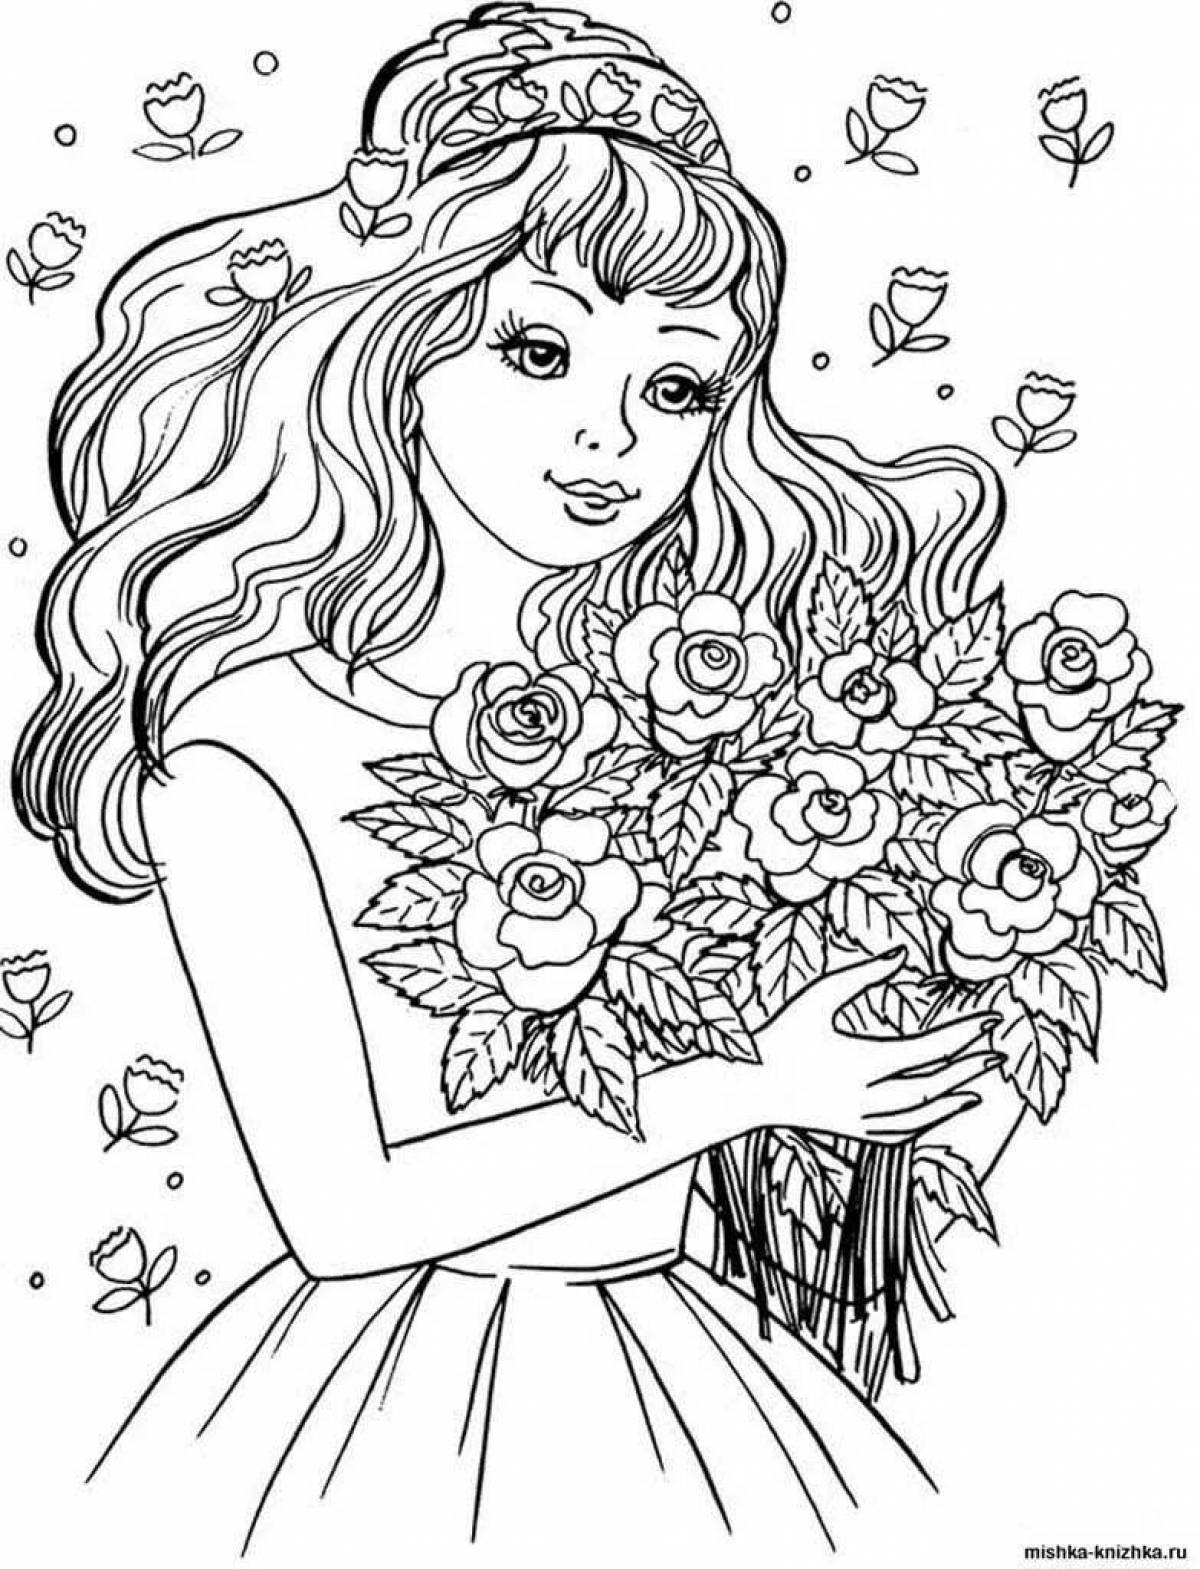 Cute coloring book for 12 year old girls